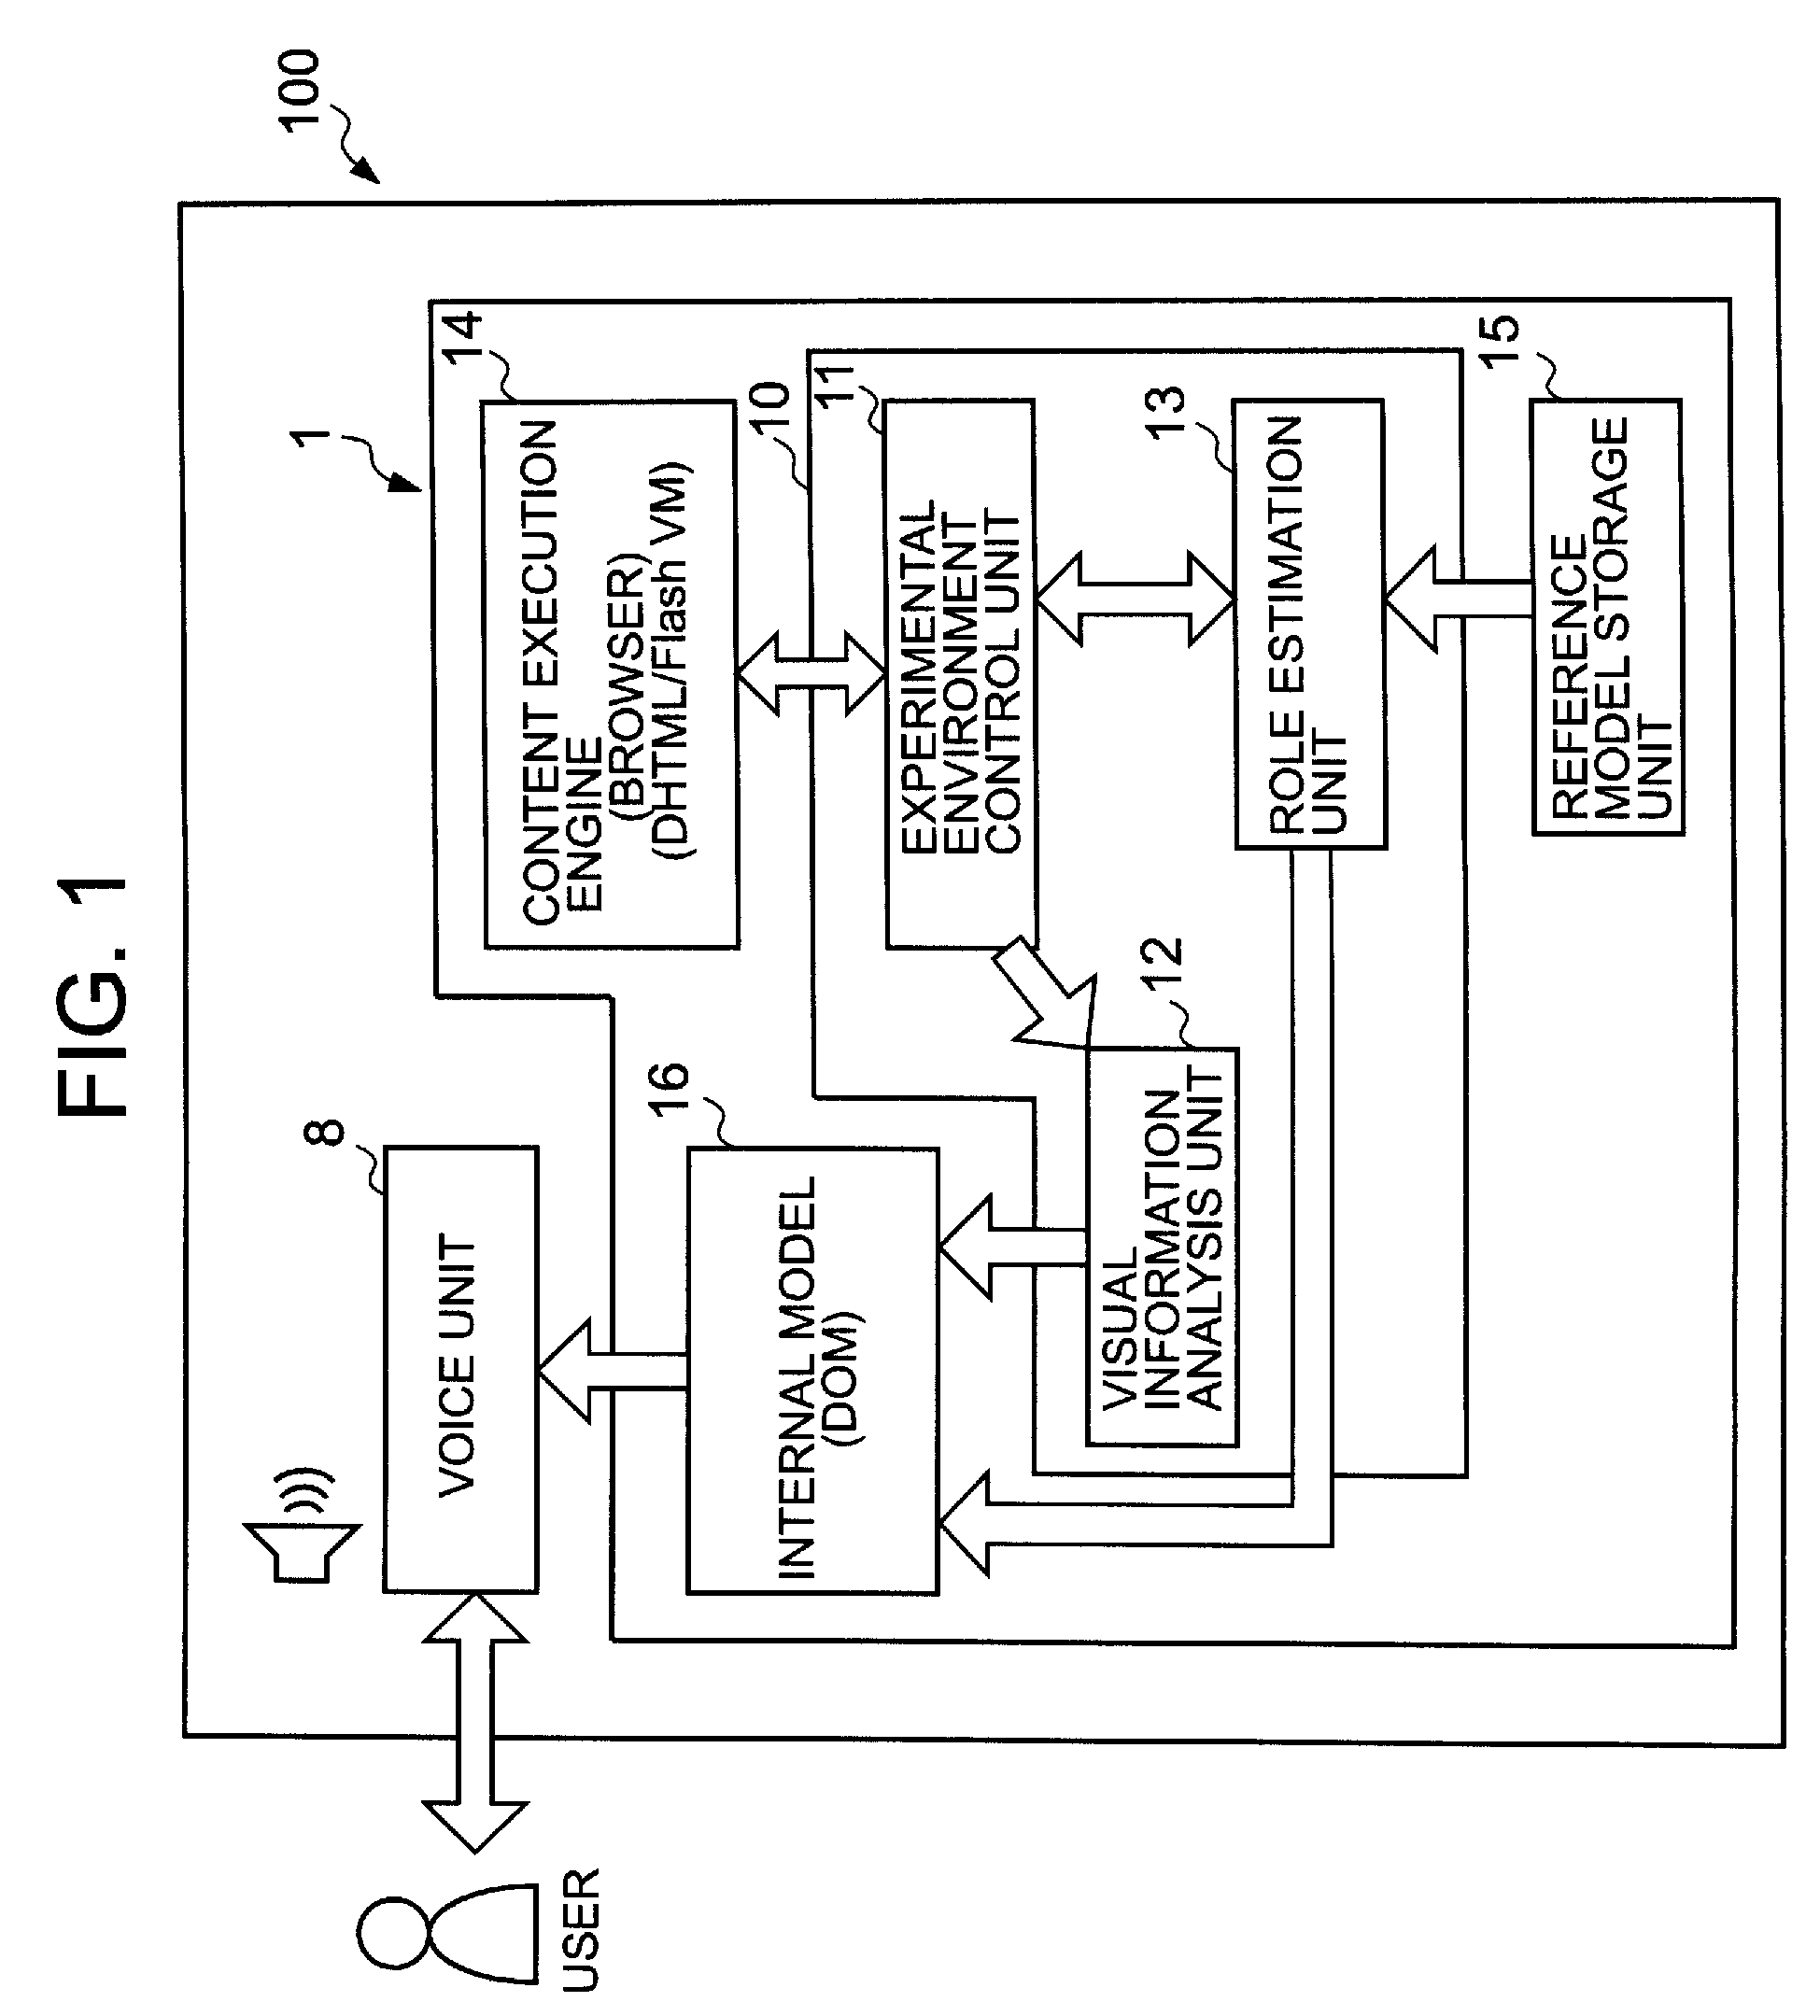 Method for obtaining accessibility information, computer program and accessibility information device